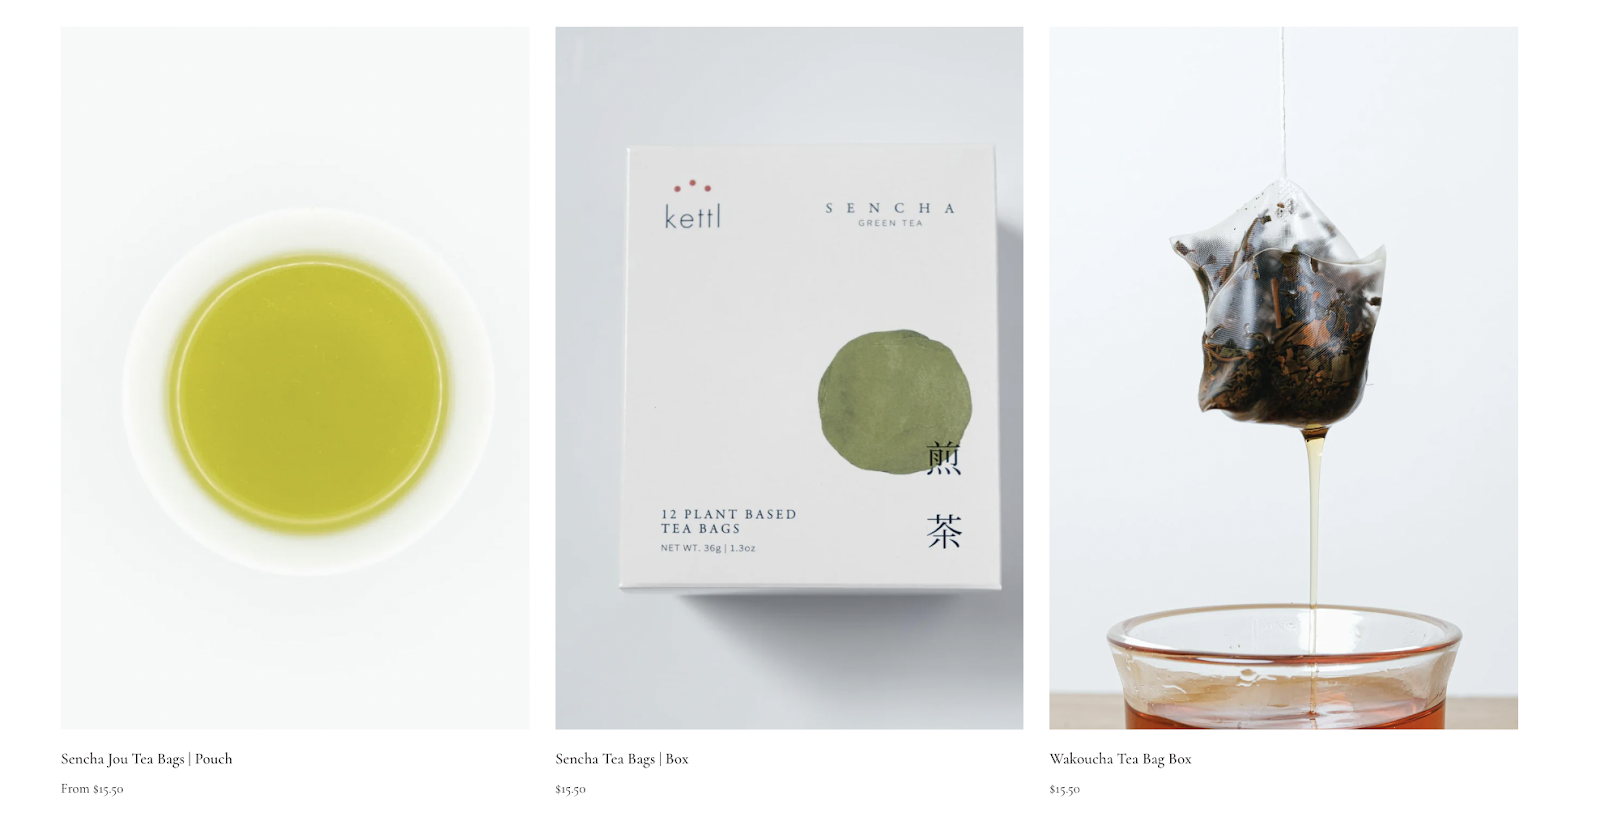 Sencha white and green tea box and tea bags from eCommerce shop